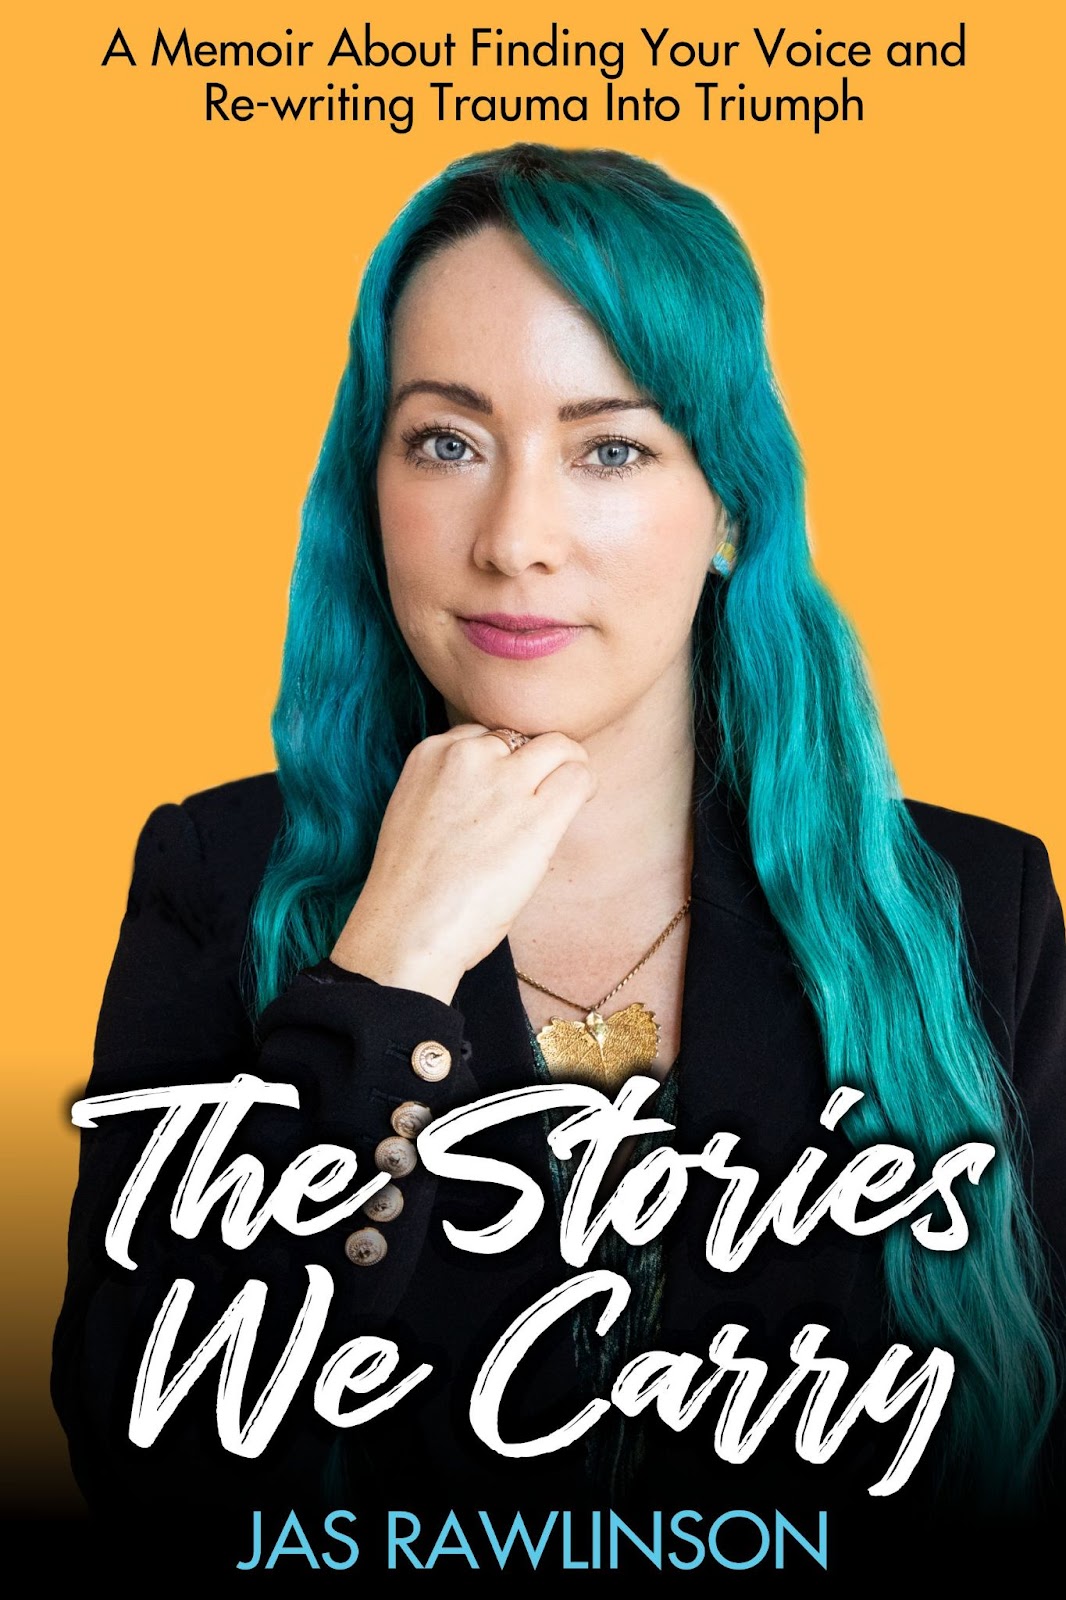 Author Jas Rawlinson - The Stories We Carry